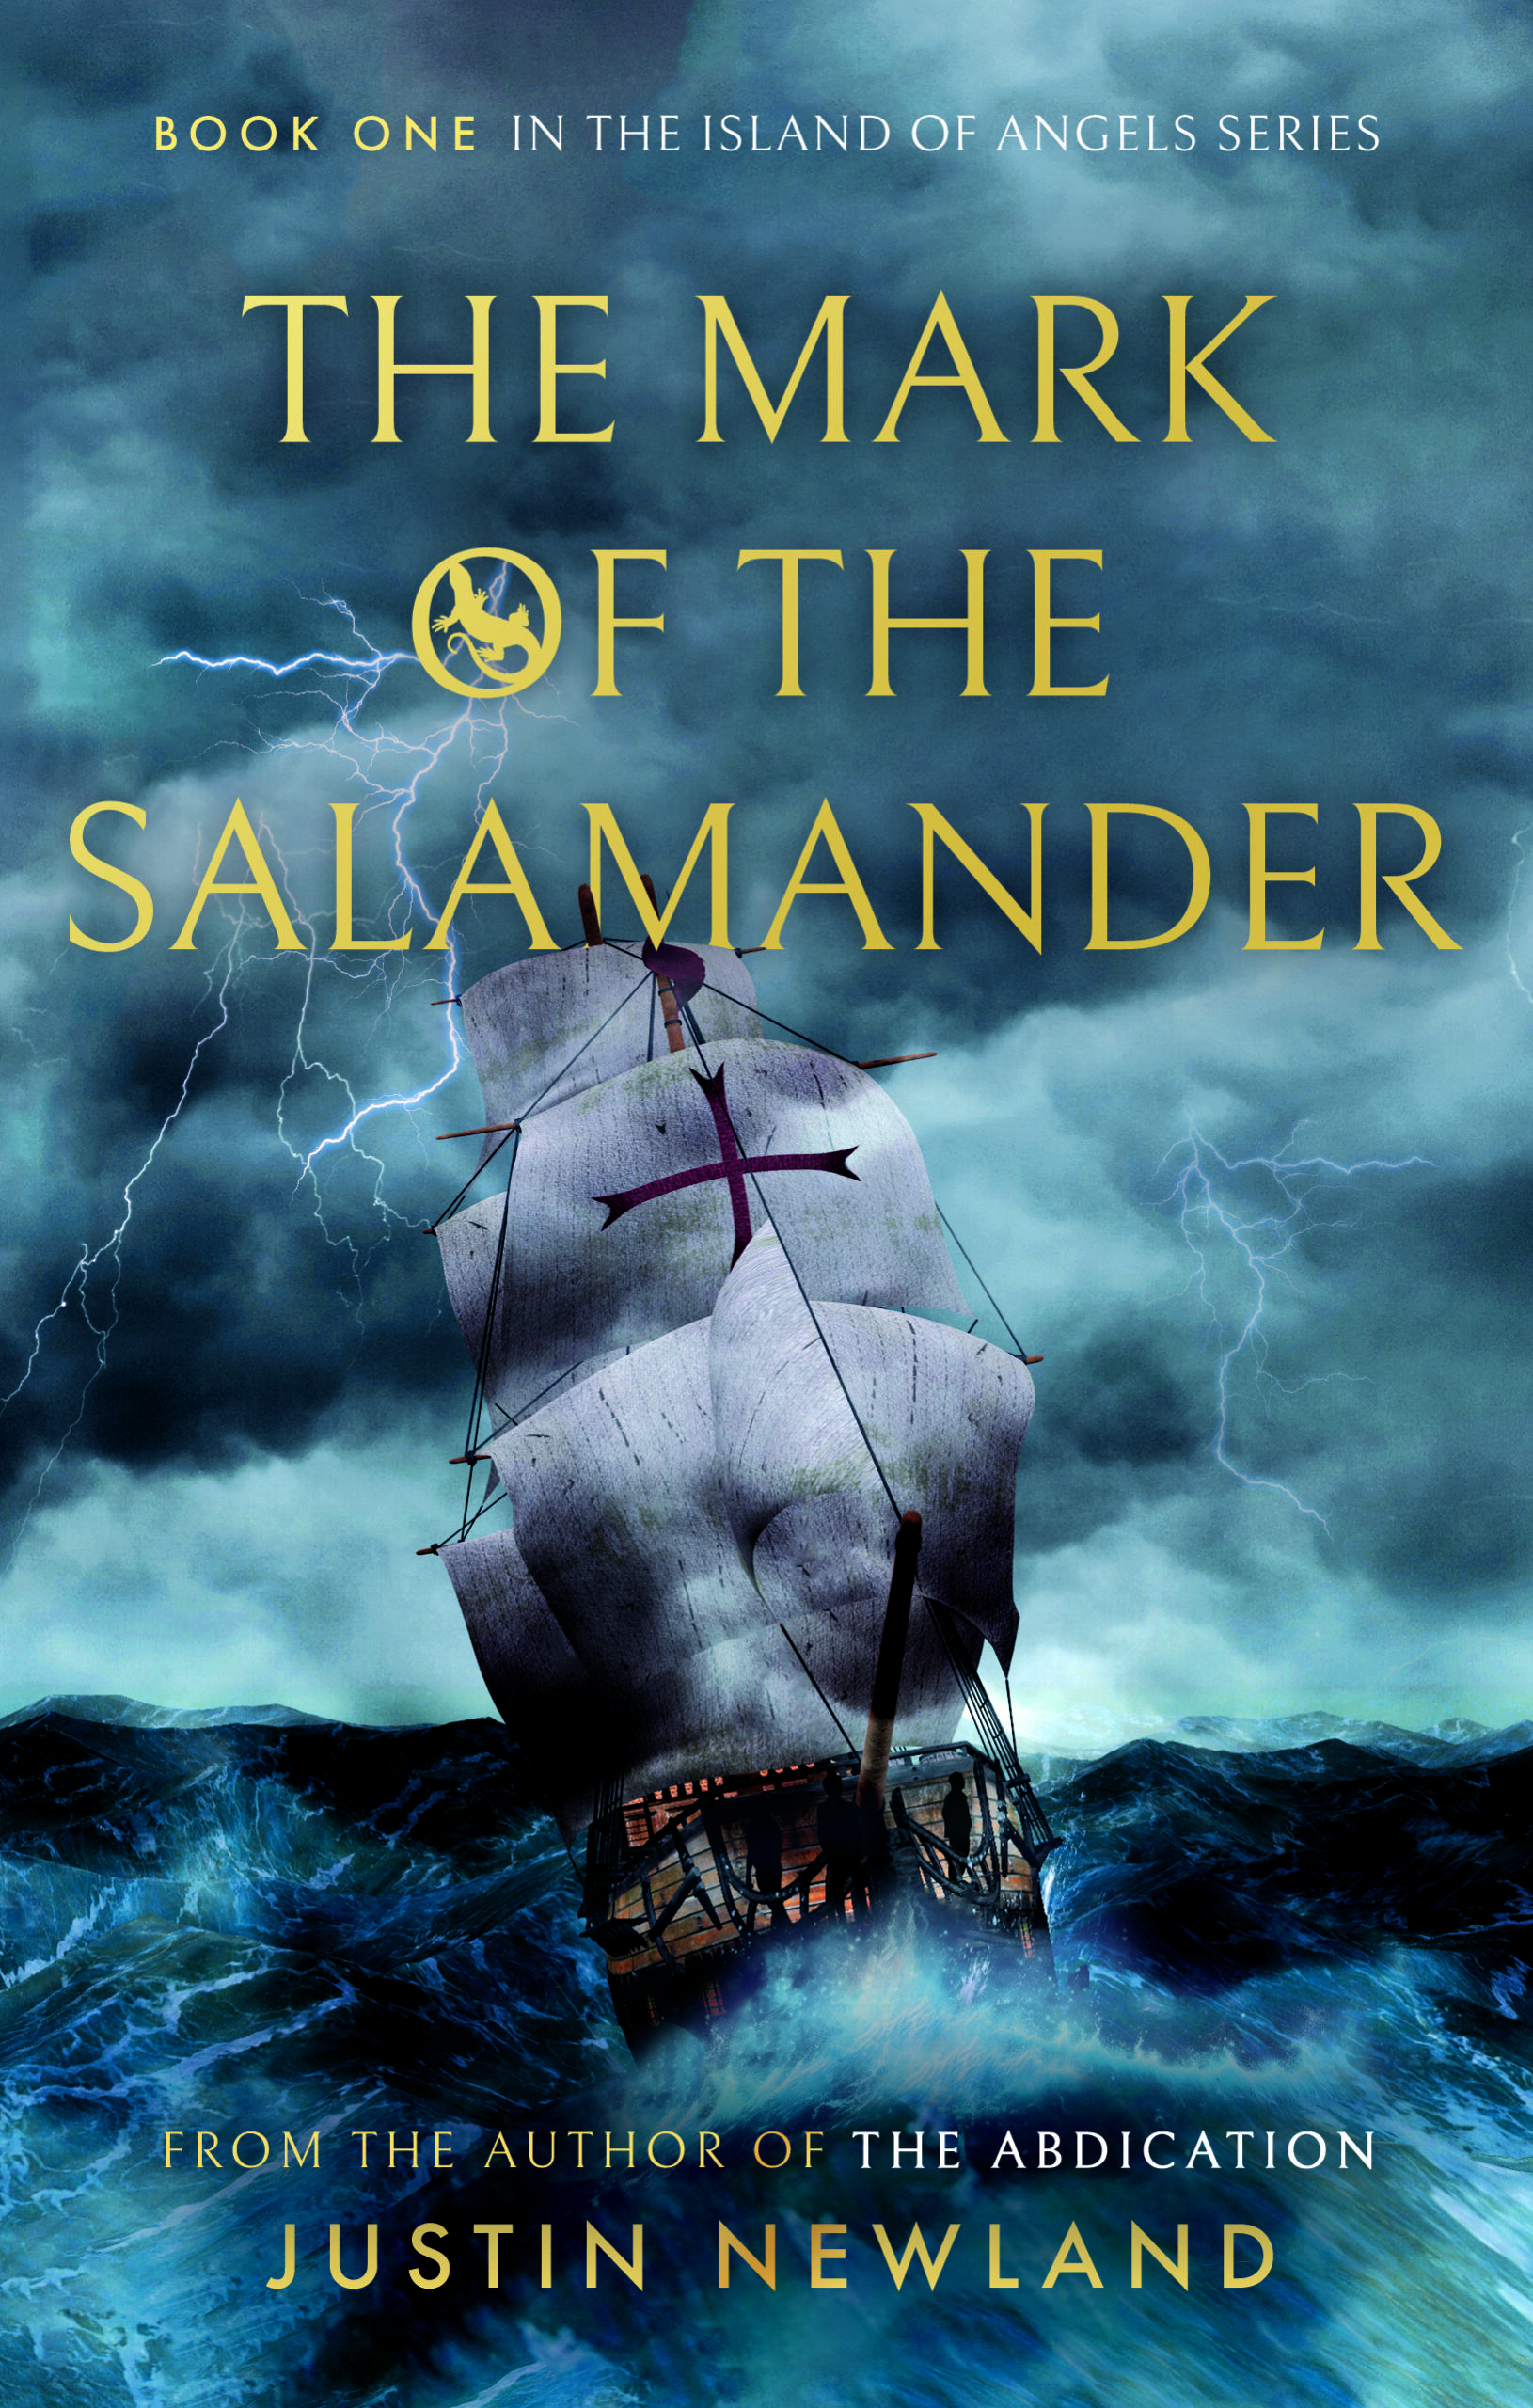 The Mark of the Salamander by Justin Newland